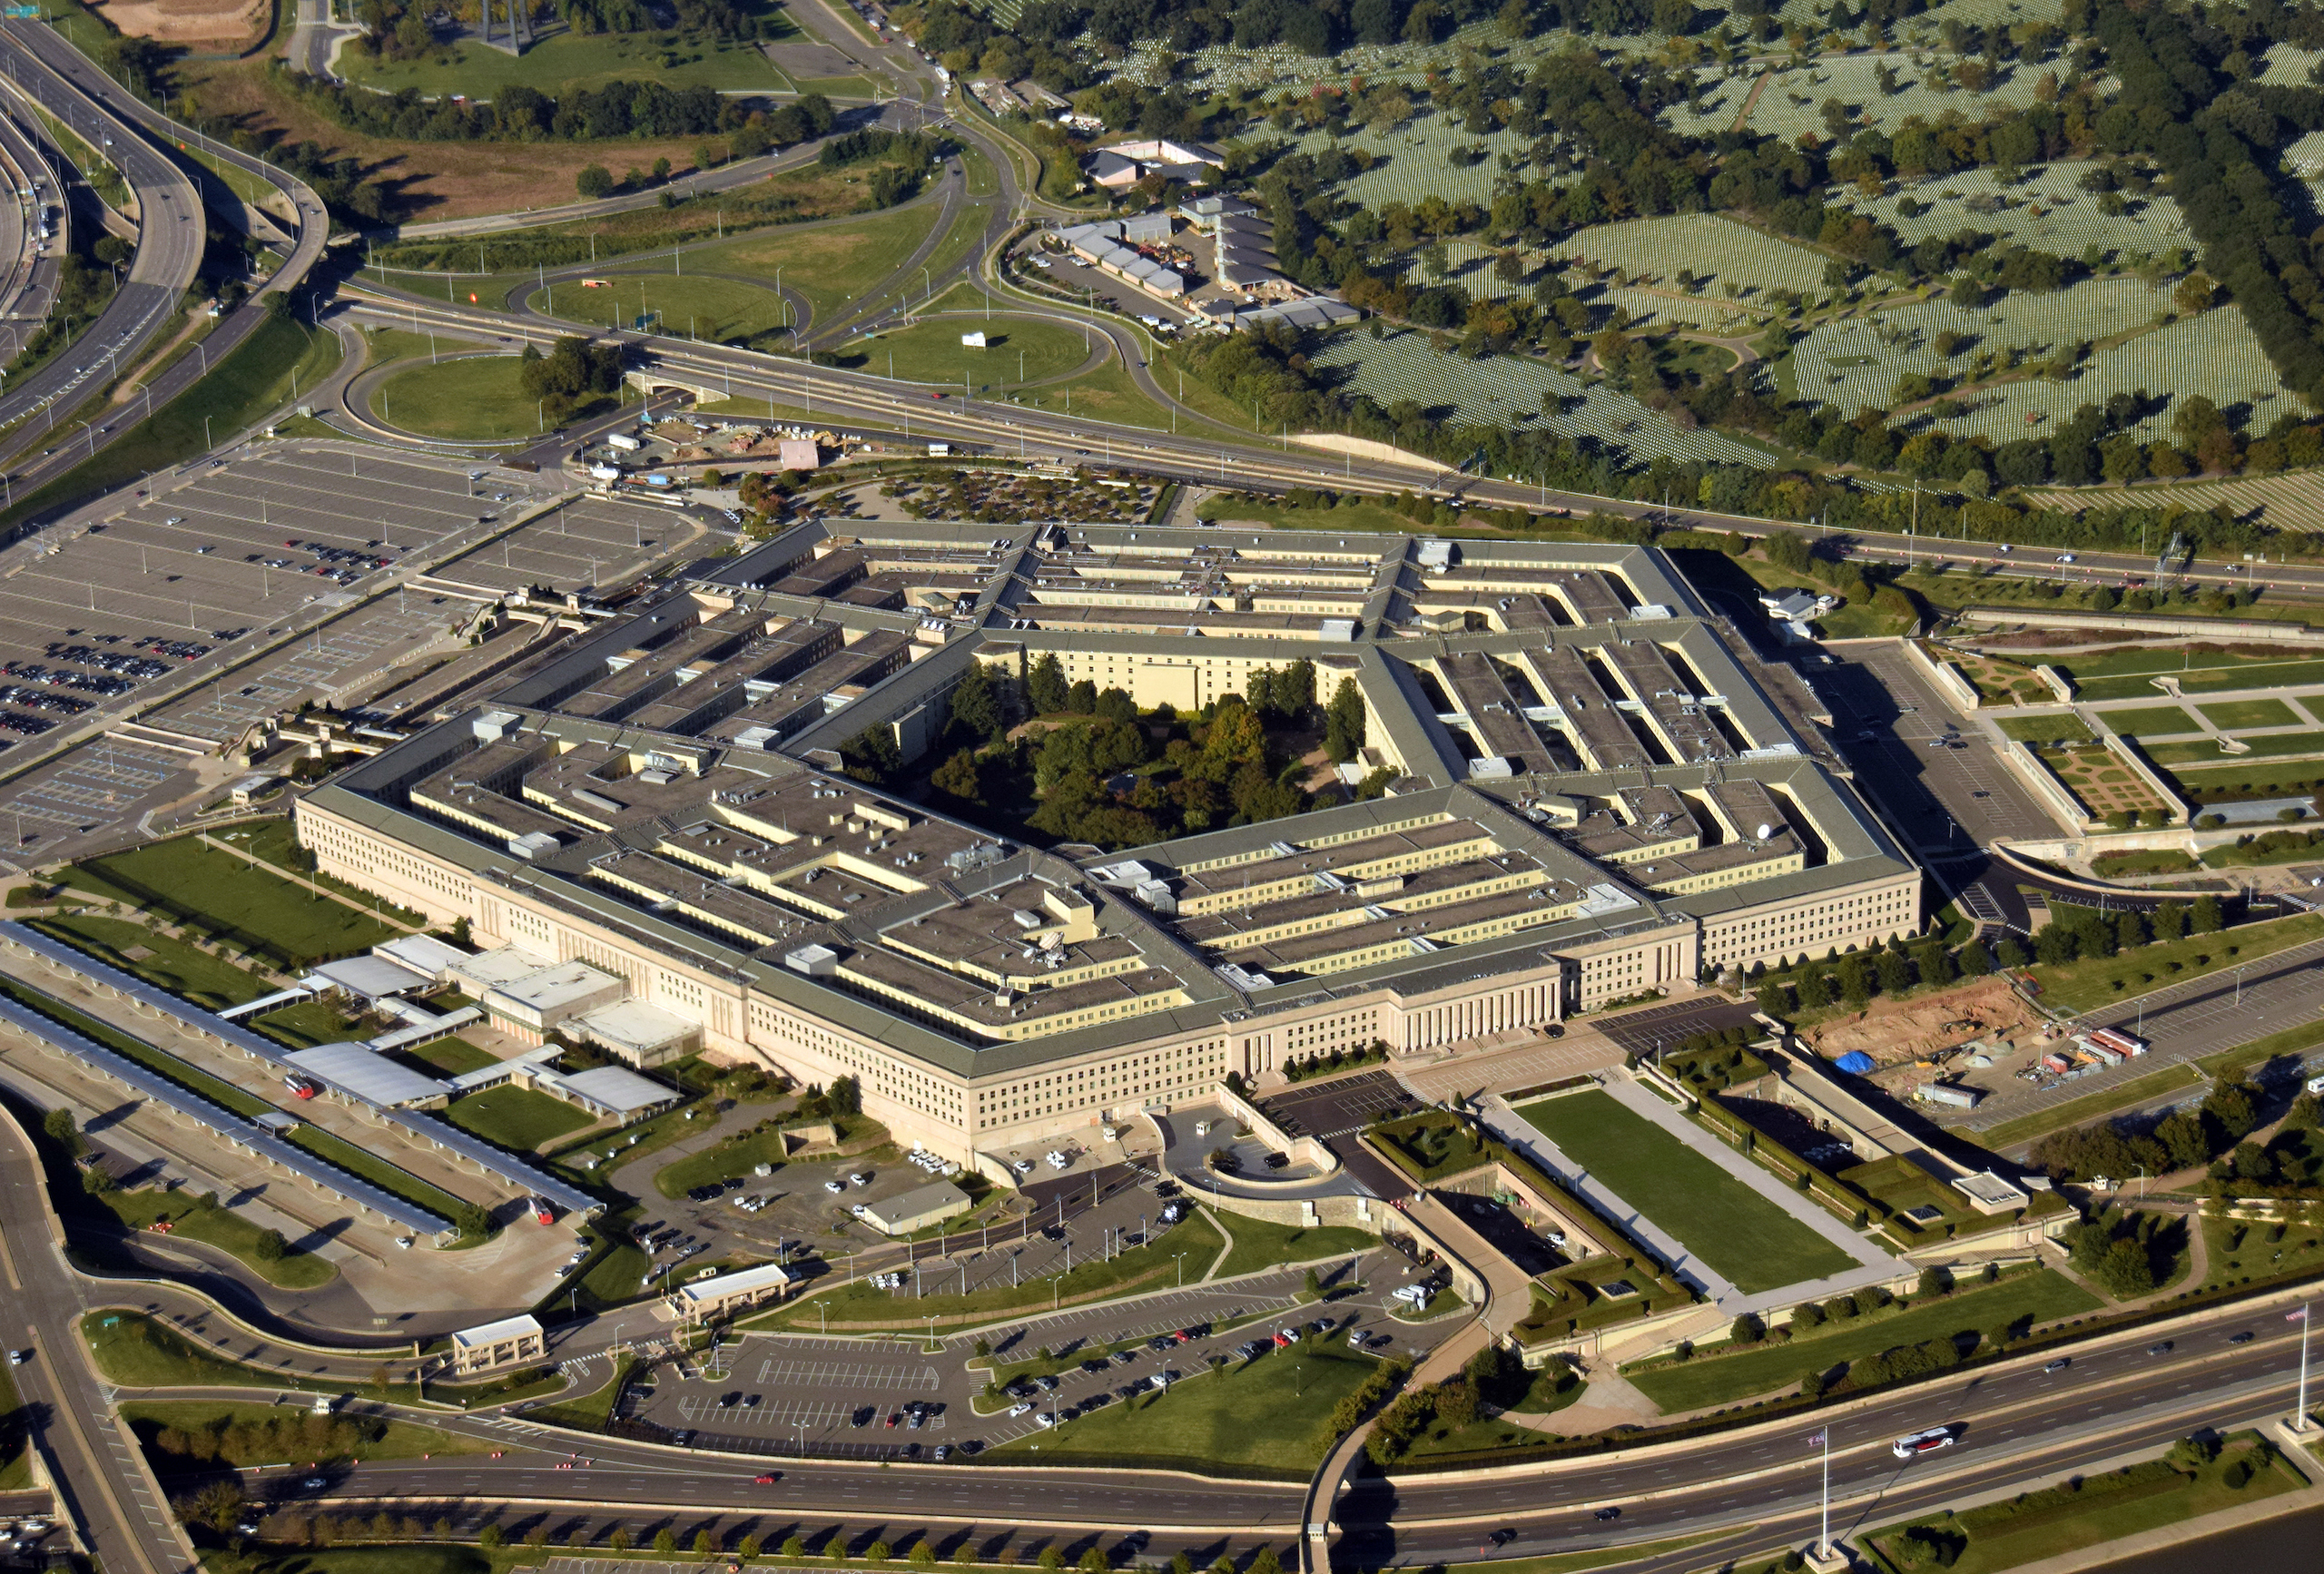 The Pentagon aerial view